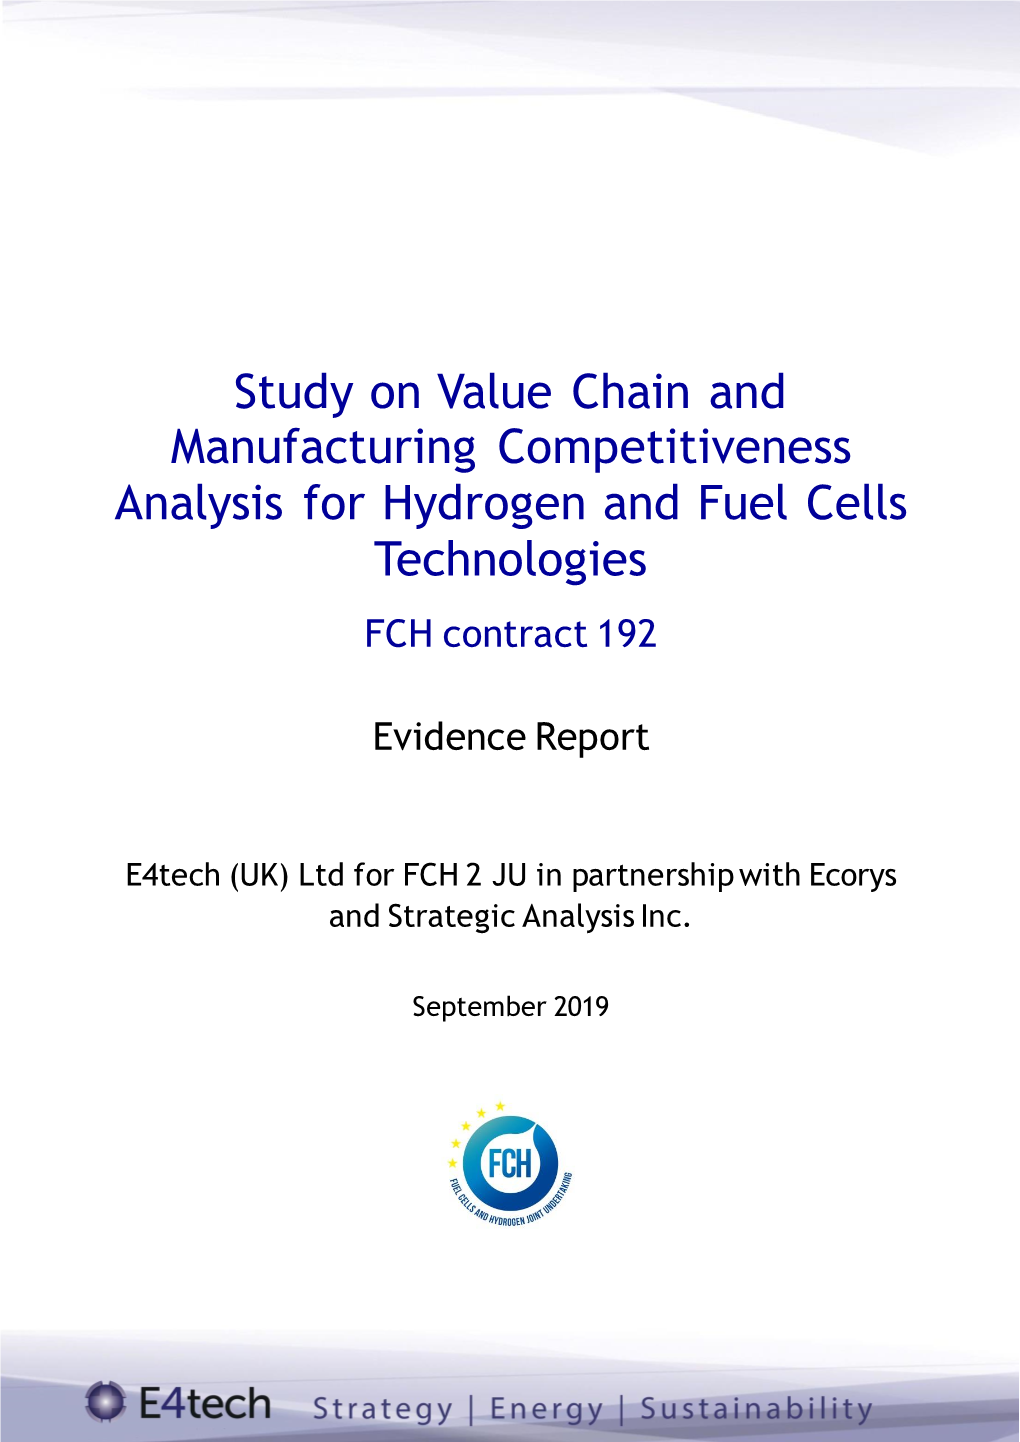 Study on Value Chain and Manufacturing Competitiveness Analysis for Hydrogen and Fuel Cells Technologies FCH Contract 192